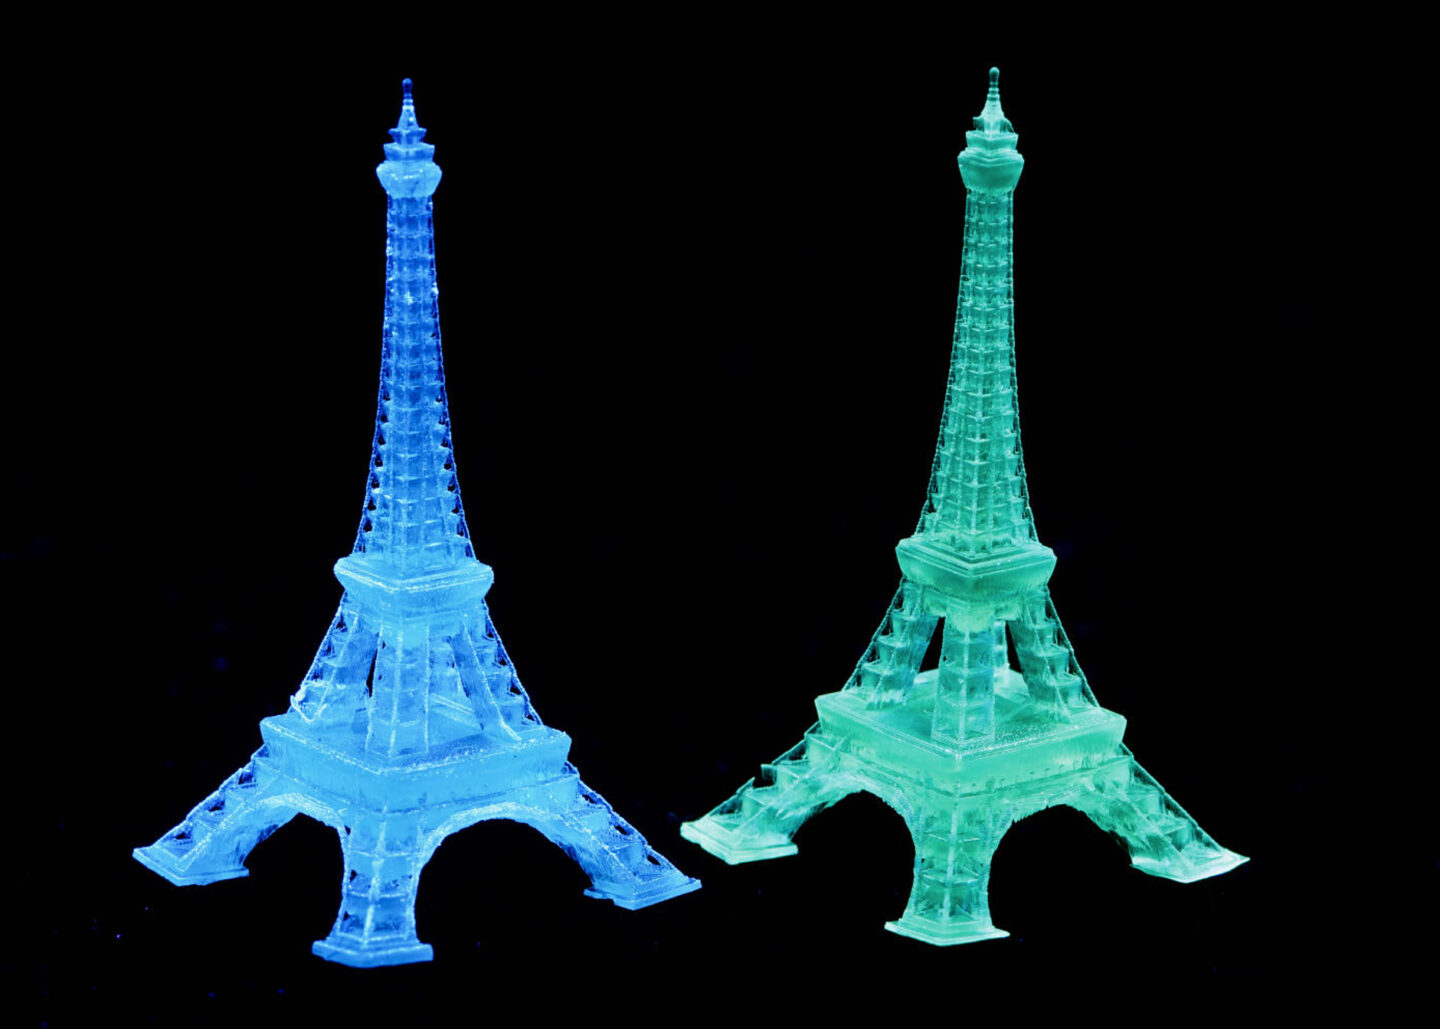 Eiffel Tower-shaped luminescent structures 3D-printed from supramolecular ink